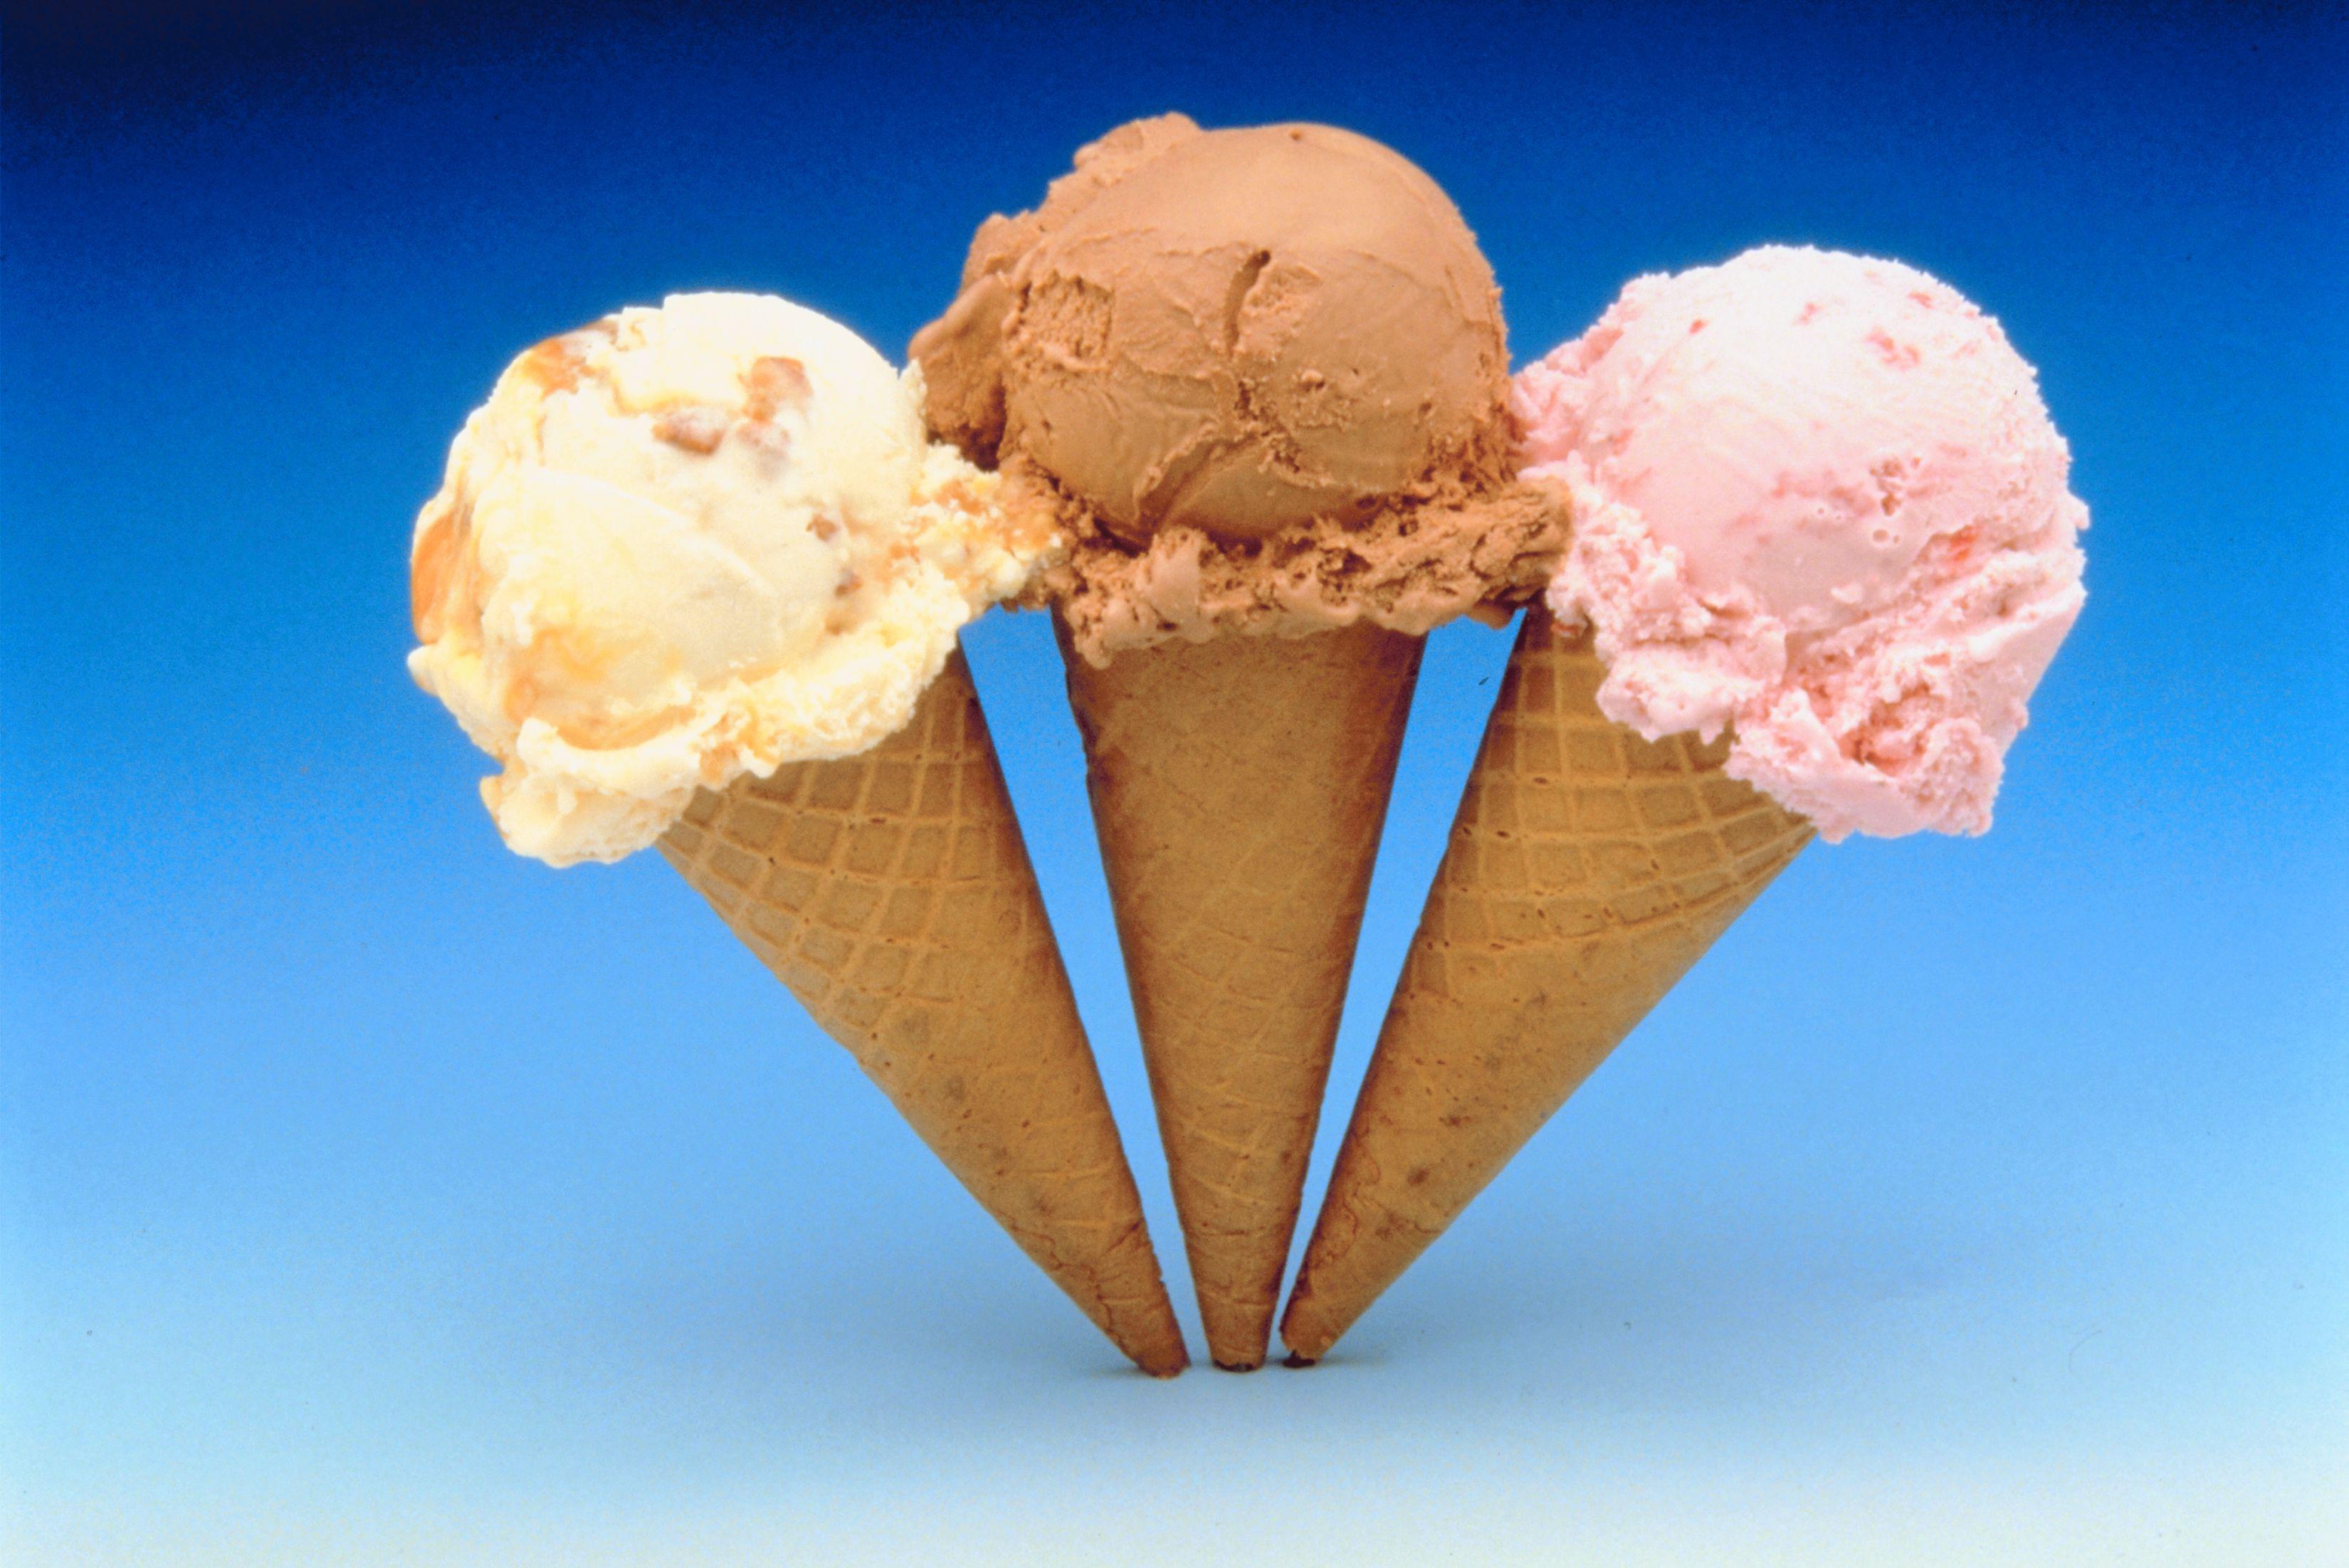 TODAY IS NATIONAL ICE CREAM CONE DAY Praise Cleveland